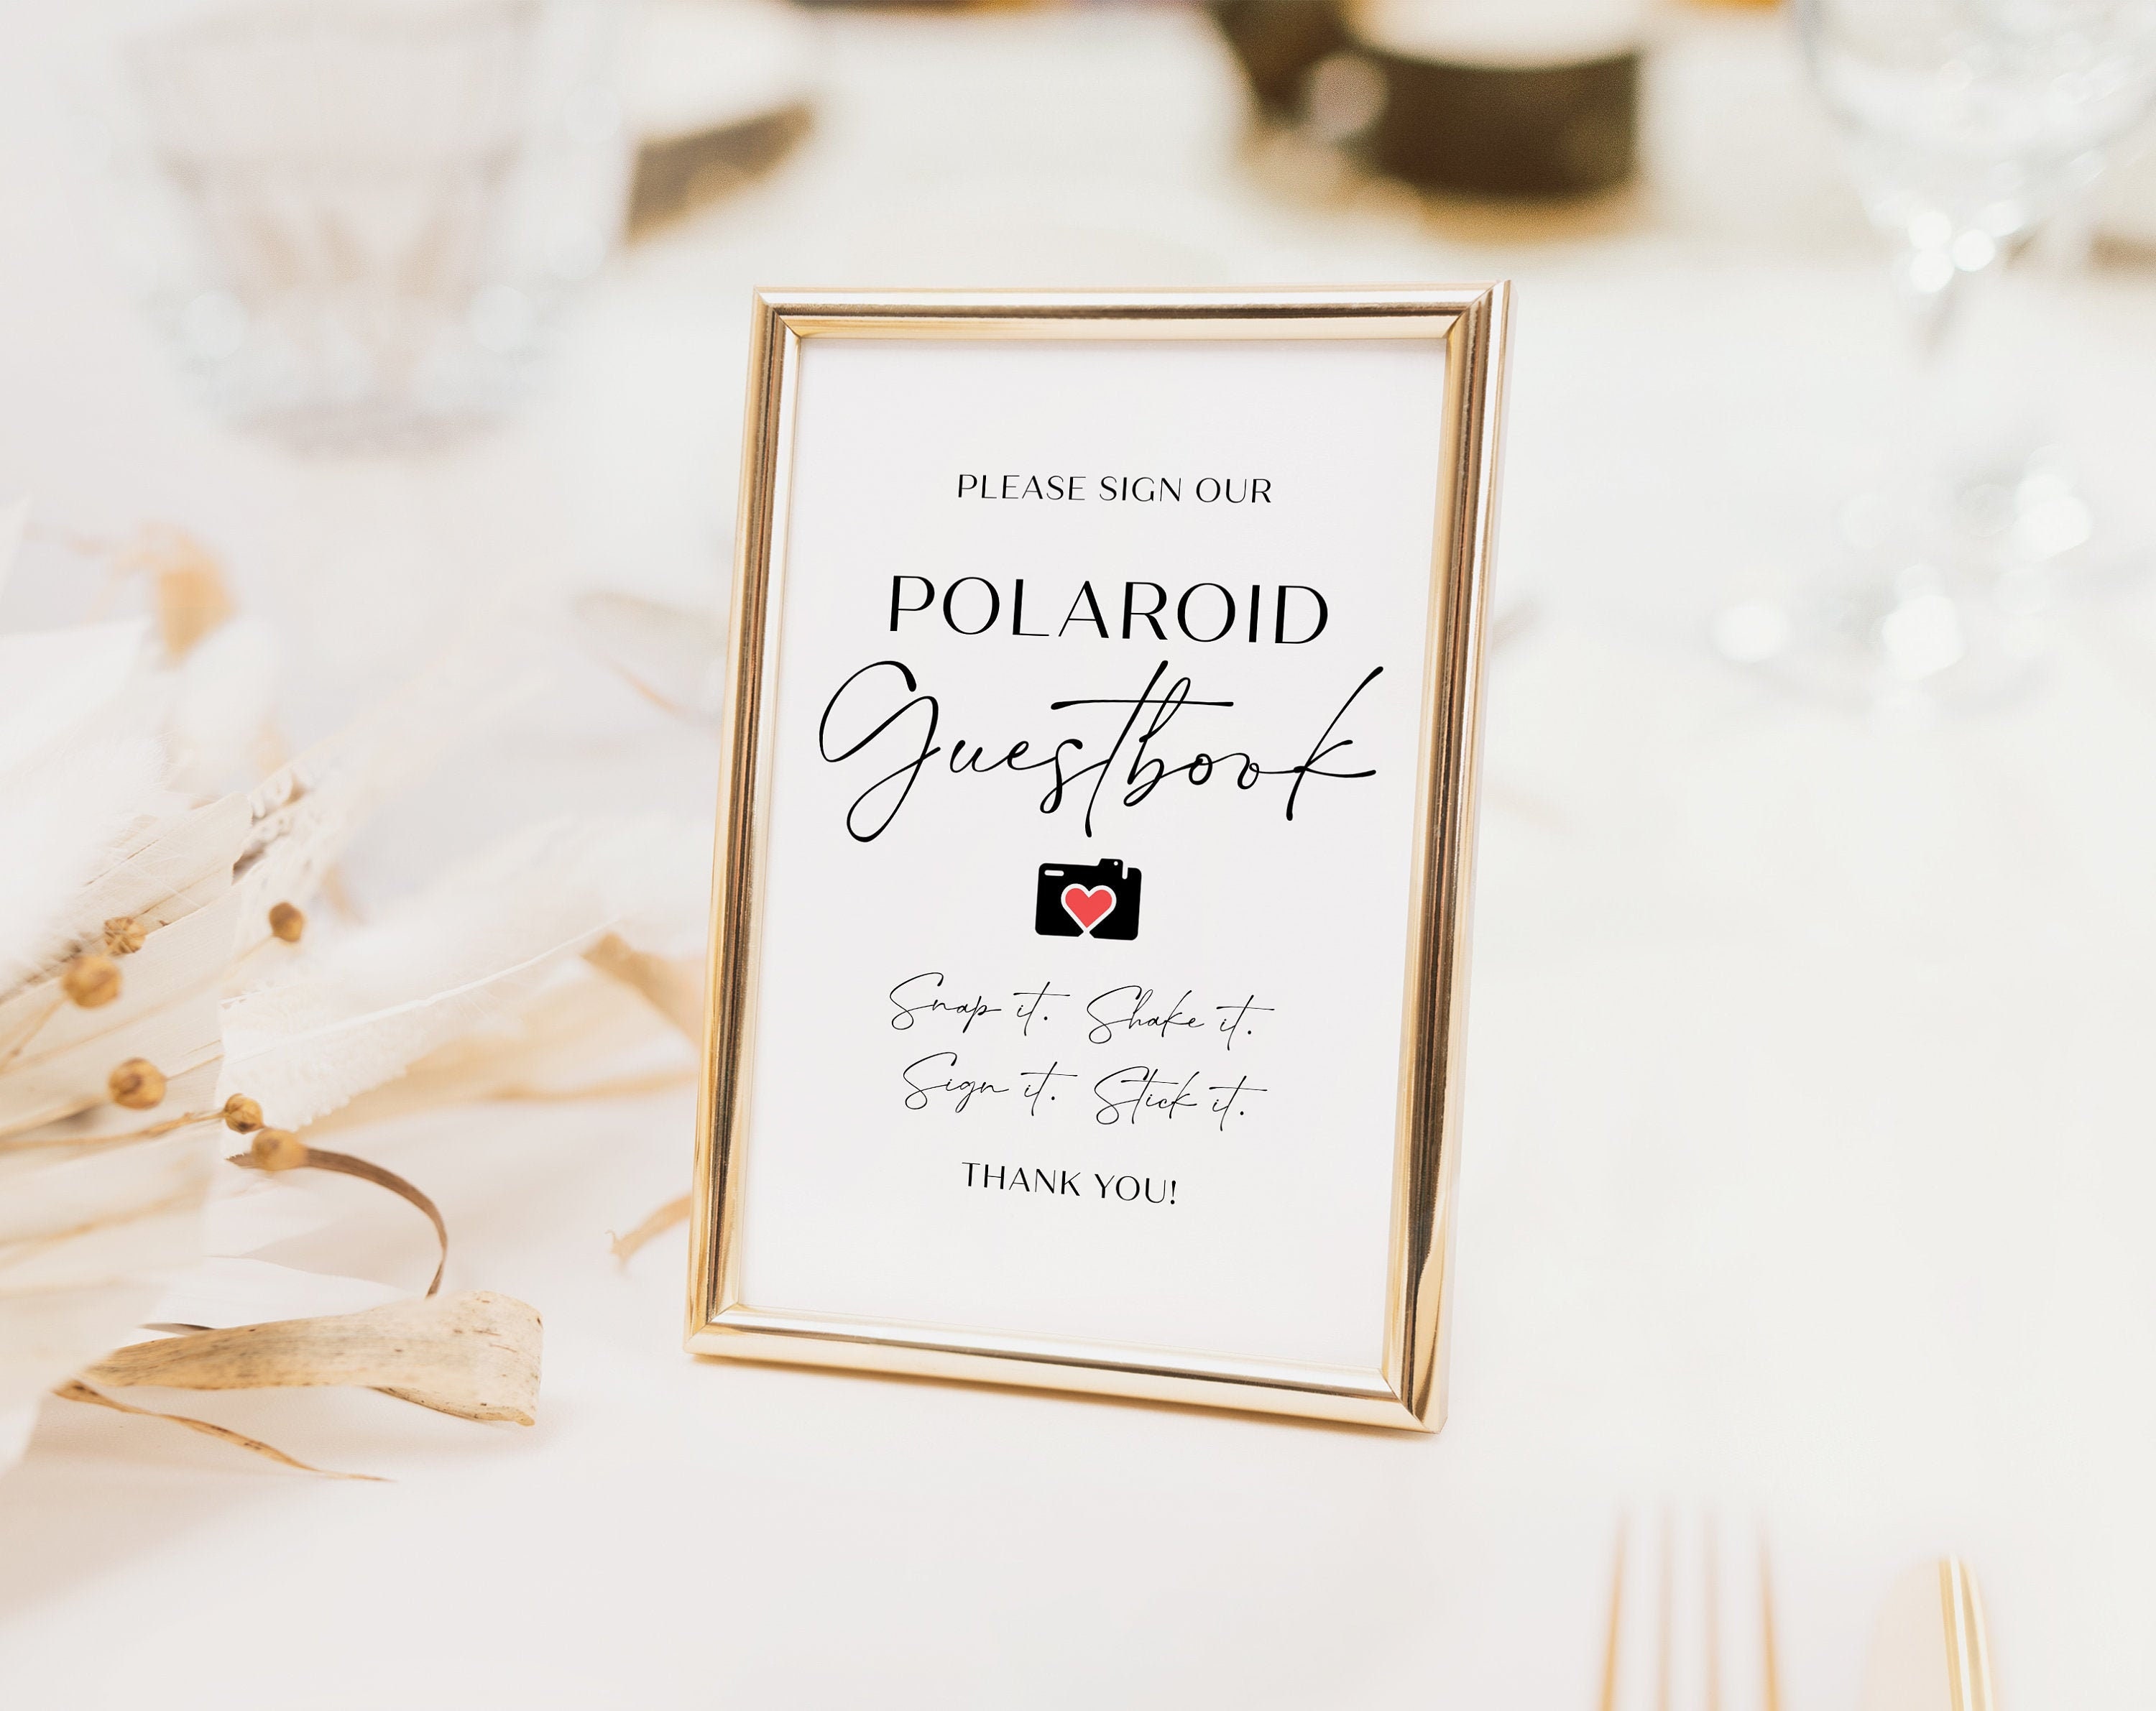 ISA Polaroid Guest Book Sign, Wedding Photo Guestbook Sign, Photo Guestbook  Printable, Polaroid Guestbook Sign Template, 5x7 8x10 11x14 